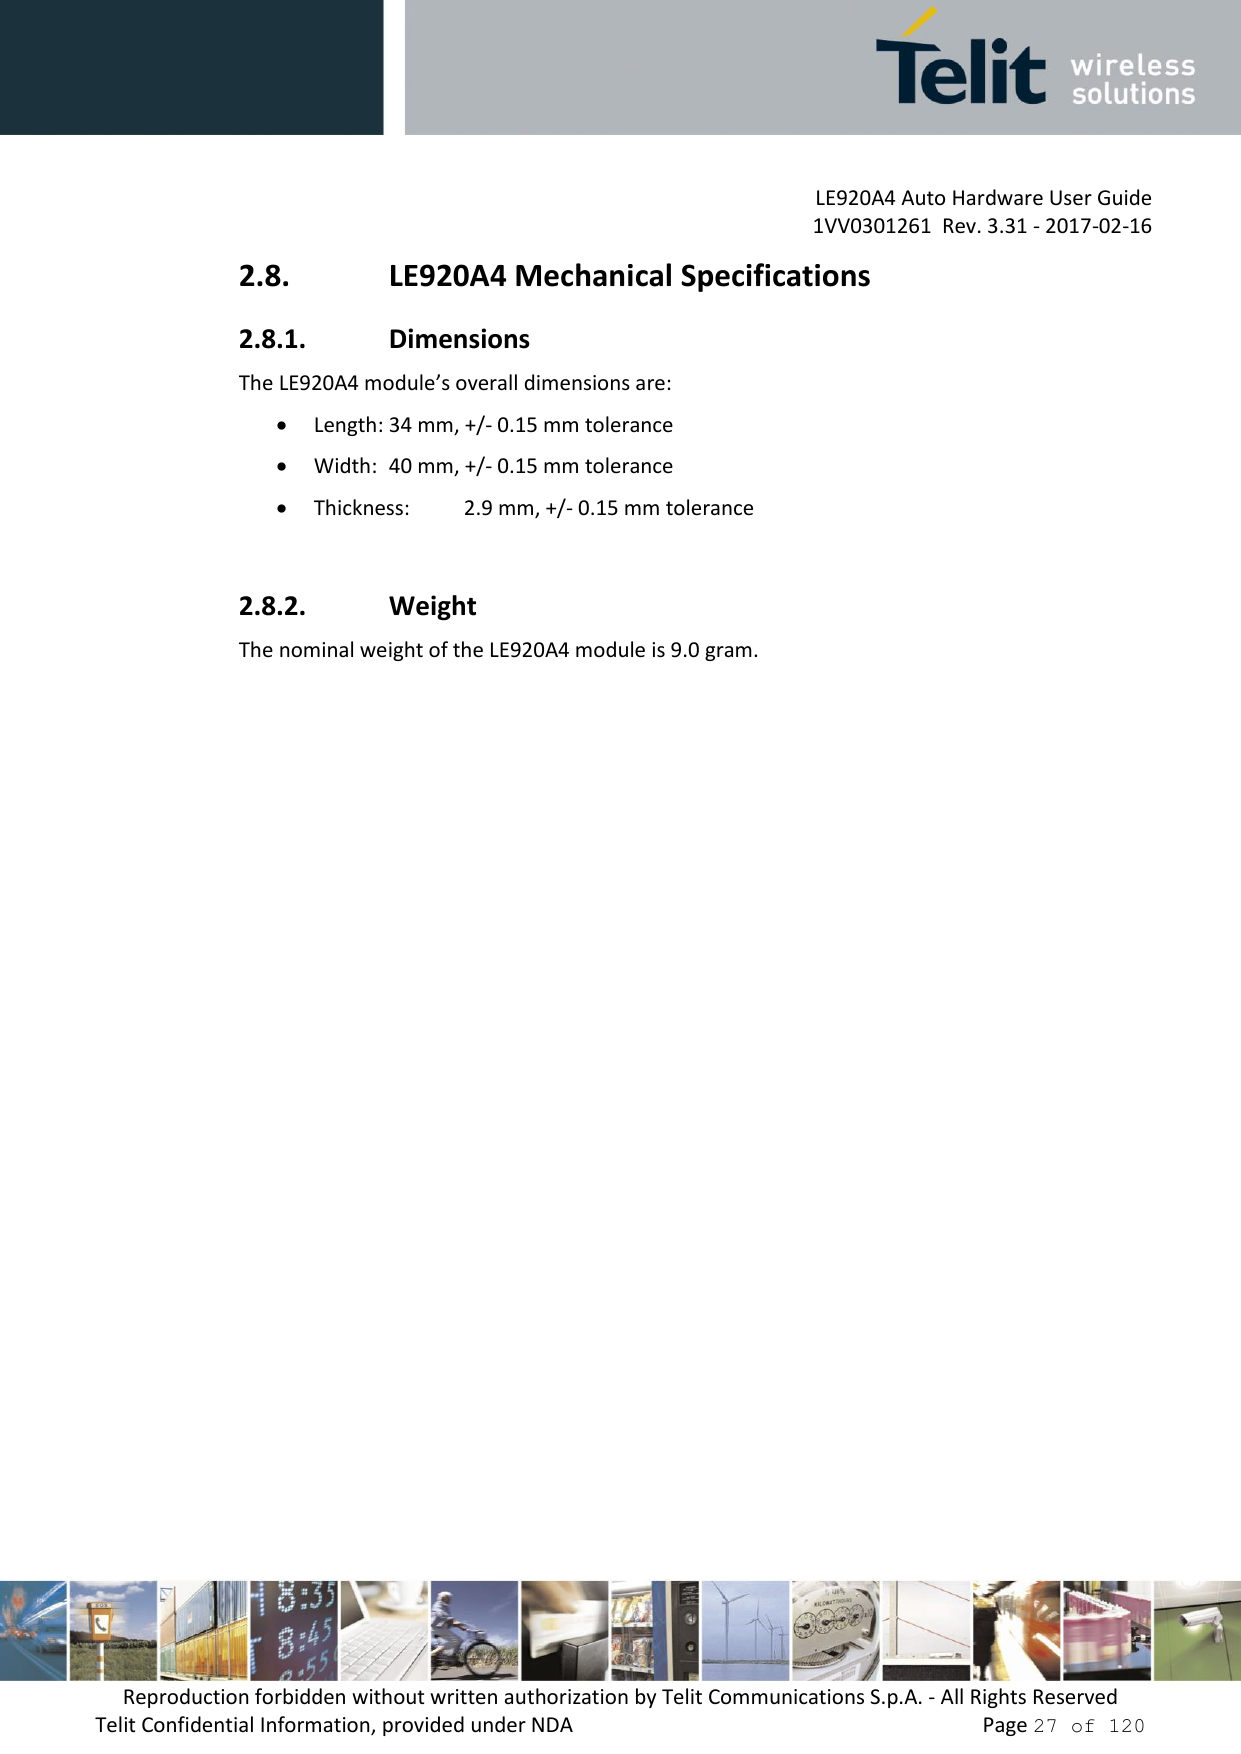         LE920A4 Auto Hardware User Guide     1VV0301261  Rev. 3.31 - 2017-02-16 Reproduction forbidden without written authorization by Telit Communications S.p.A. - All Rights Reserved Telit Confidential Information, provided under NDA                 Page 27 of 120 2.8. LE920A4 Mechanical Specifications 2.8.1. Dimensions The LE920A4 module’s overall dimensions are:   Length: 34 mm, +/- 0.15 mm tolerance  Width:  40 mm, +/- 0.15 mm tolerance  Thickness:   2.9 mm, +/- 0.15 mm tolerance  2.8.2. Weight The nominal weight of the LE920A4 module is 9.0 gram. 